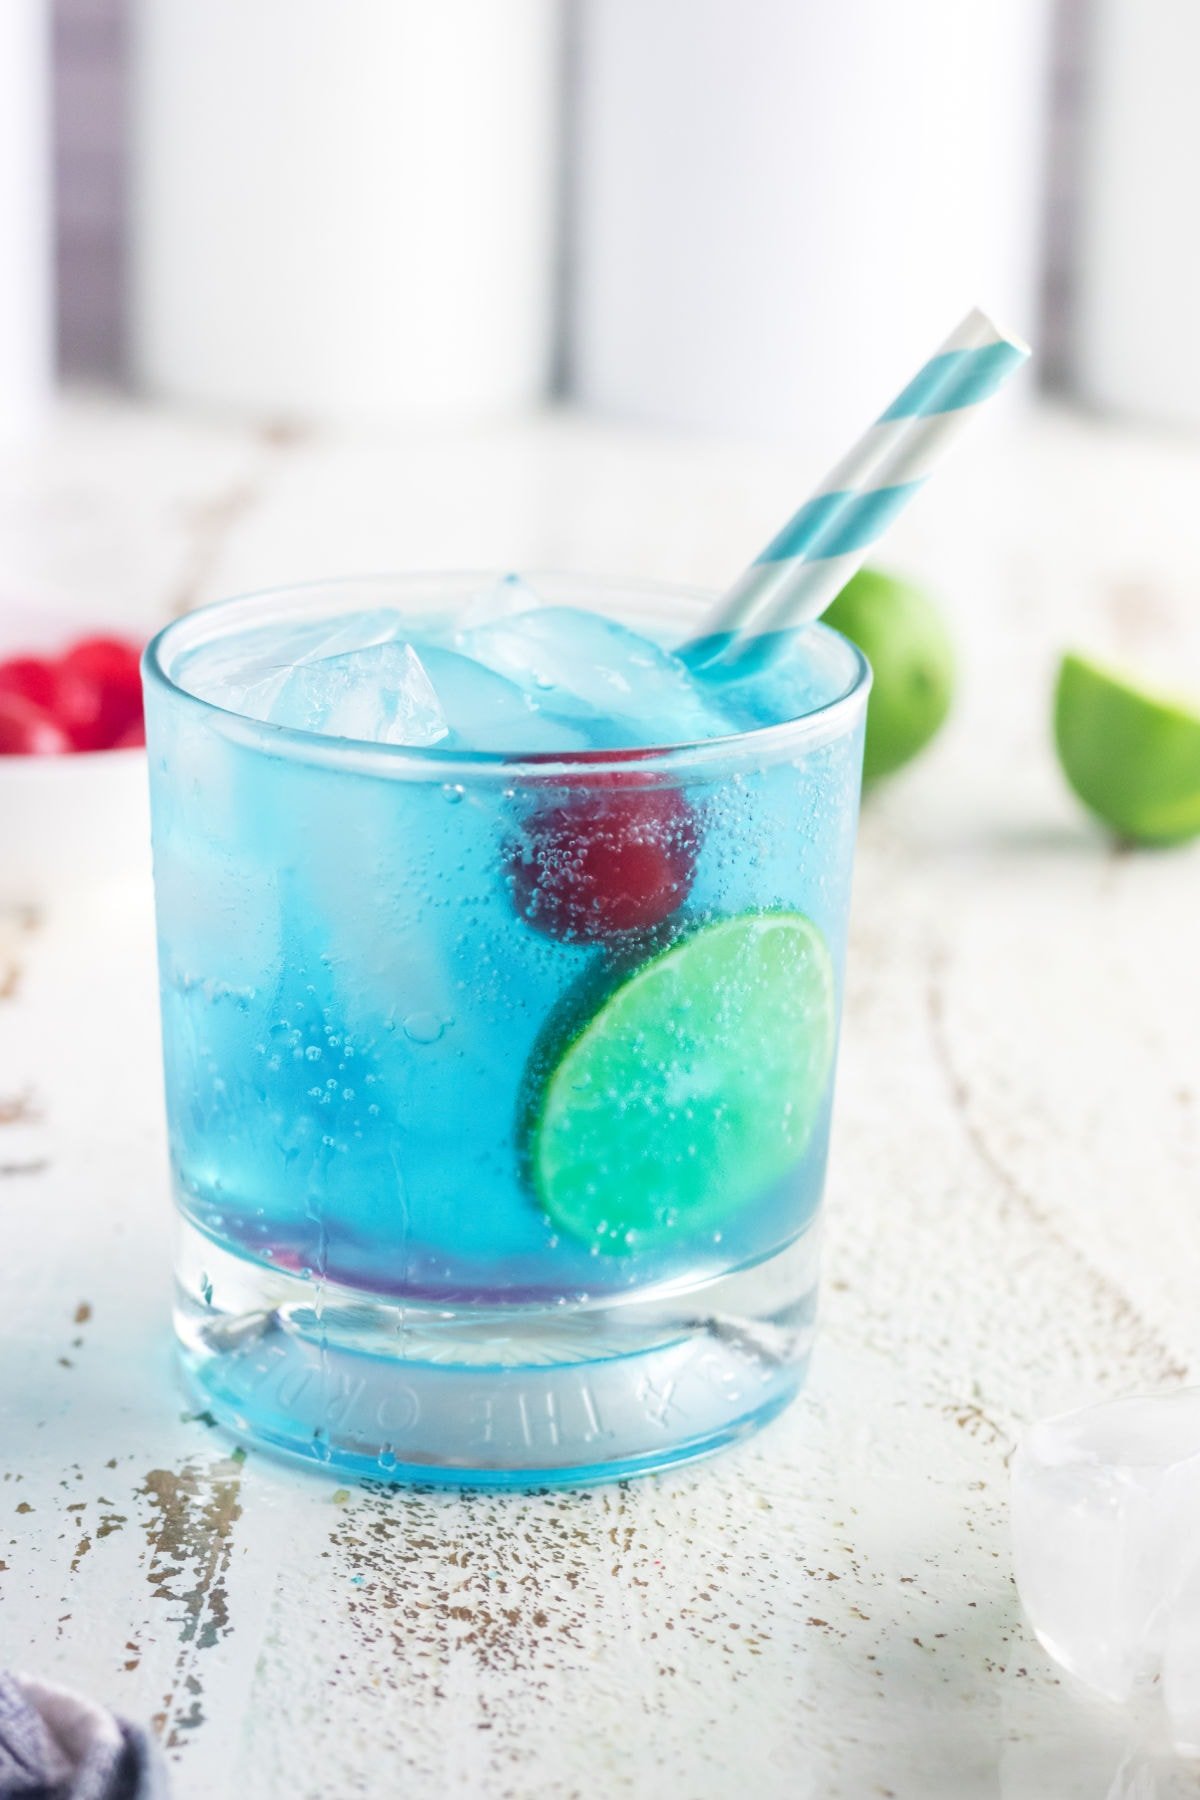 Side view of this cocktail with a blue and white straw.